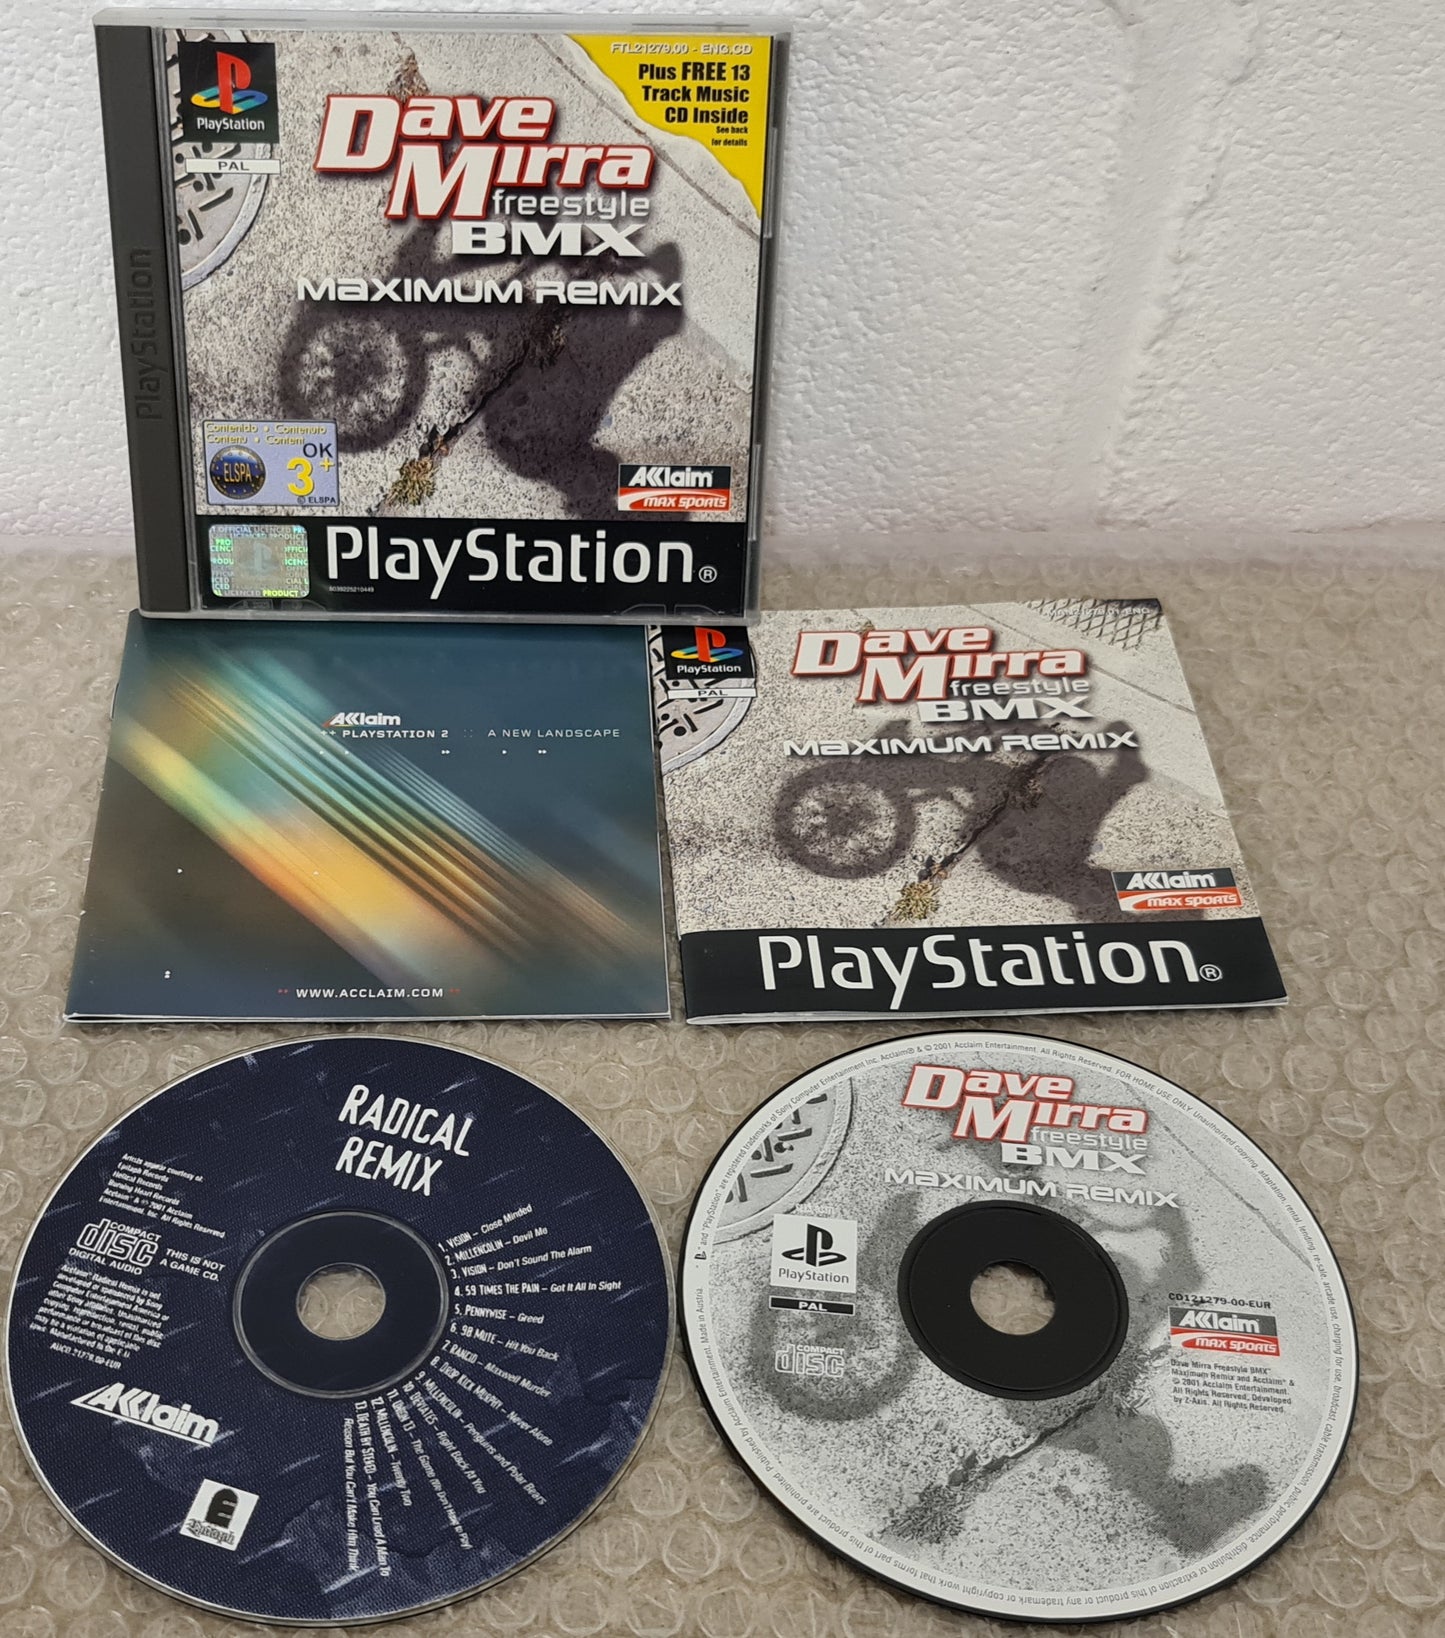 Dave Mirra Freestyle BMX Maximum Remix with Ultra RARE Music CD Sony Playstation 1 (PS1) Game